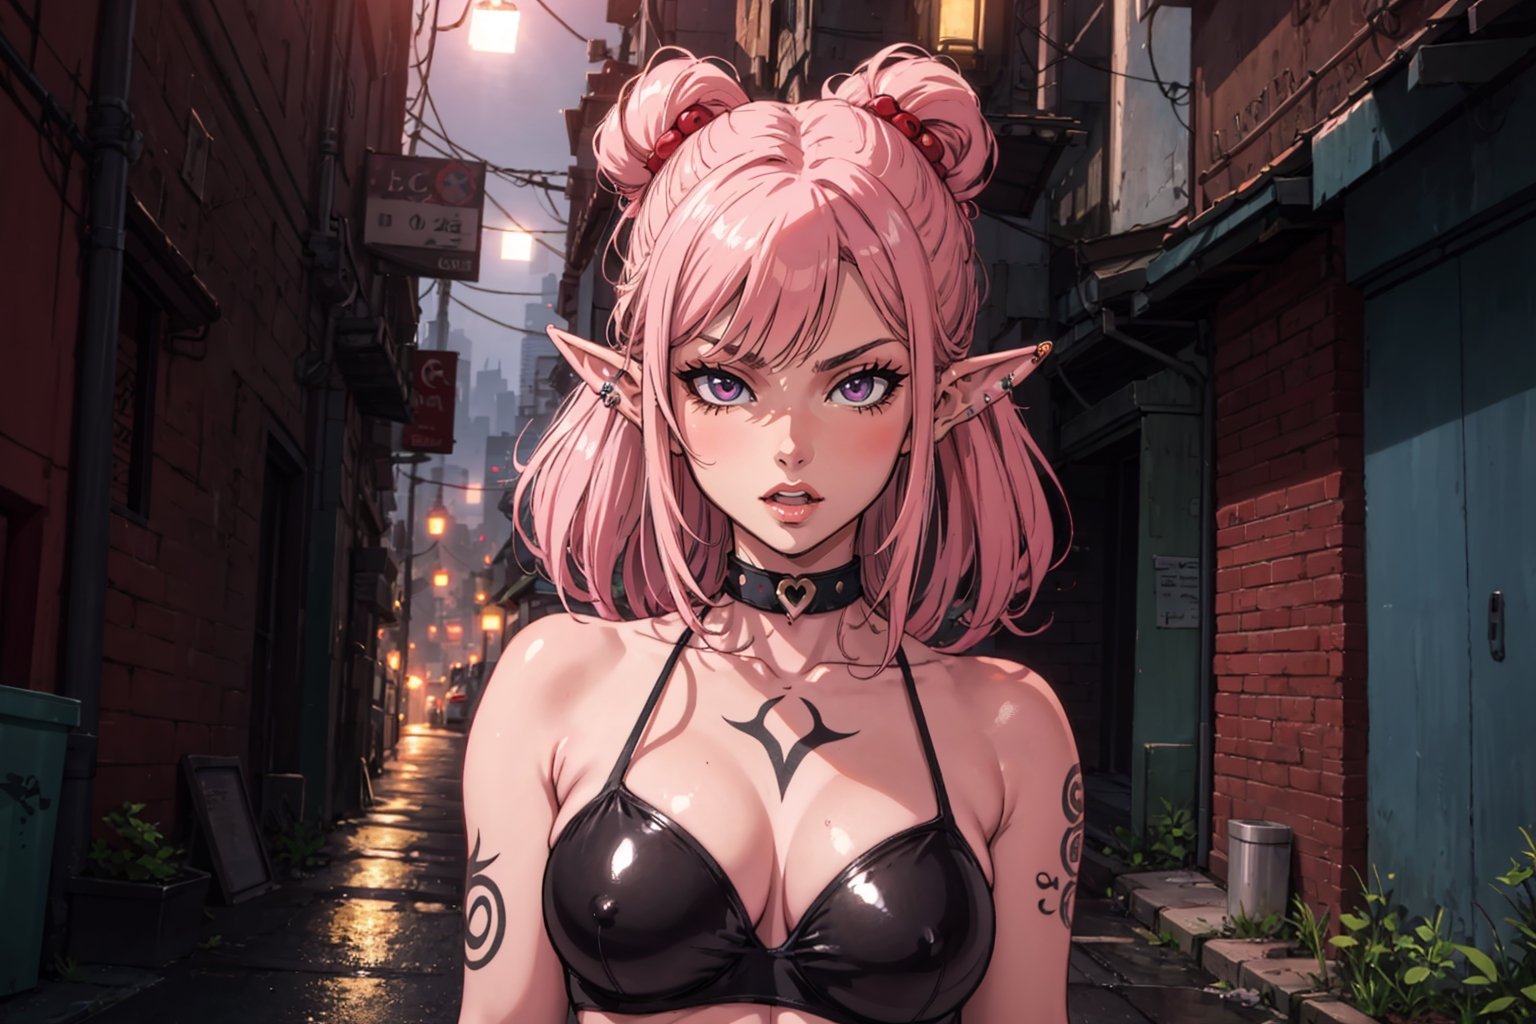 In a moody, dimly-lit alleyway, a modern goth girl stands out with an air of rebelliousness. Her piercing gaze, highlighted by dark eye circles and a tongue sticking out in a playful snub, commands attention. Red-rimmed eyes seem to absorb the surrounding light, adding to her mysterious aura. A purple twin-tailed hairstyle, adorned with elf ears, adds a touch of whimsy. Tattoos adorn her arms, telling stories of her own personal mythology. In the background, neon lights and cyberpunk architecture blend seamlessly into the night, as if the city itself is an extension of her being.